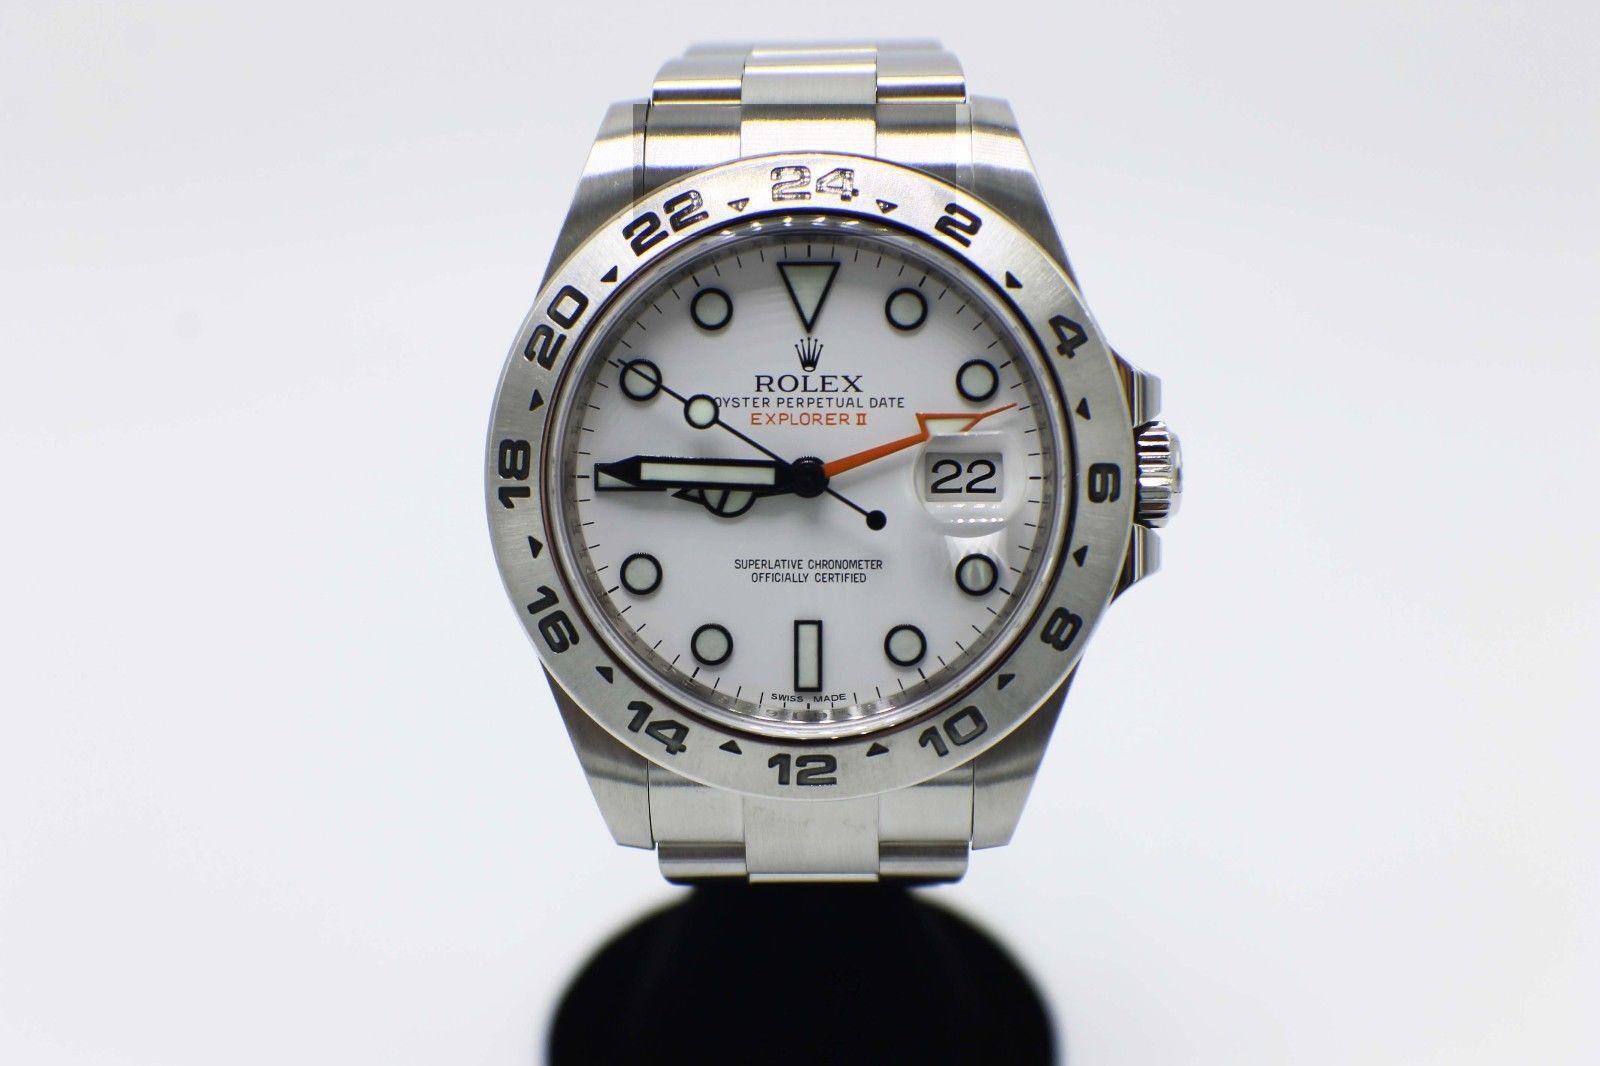 Style Number: 216570 
Serial: G897*** 
Year: 2012 
Model: Explorer II 
Case Material: Stainless Steel 
Band: Stainless Steel 
Bezel: Stainless Steel 
Dial: White Dial  
Face: Sapphire Crystal  
Case Size: 42mm 
Includes: 
-Rolex Box &